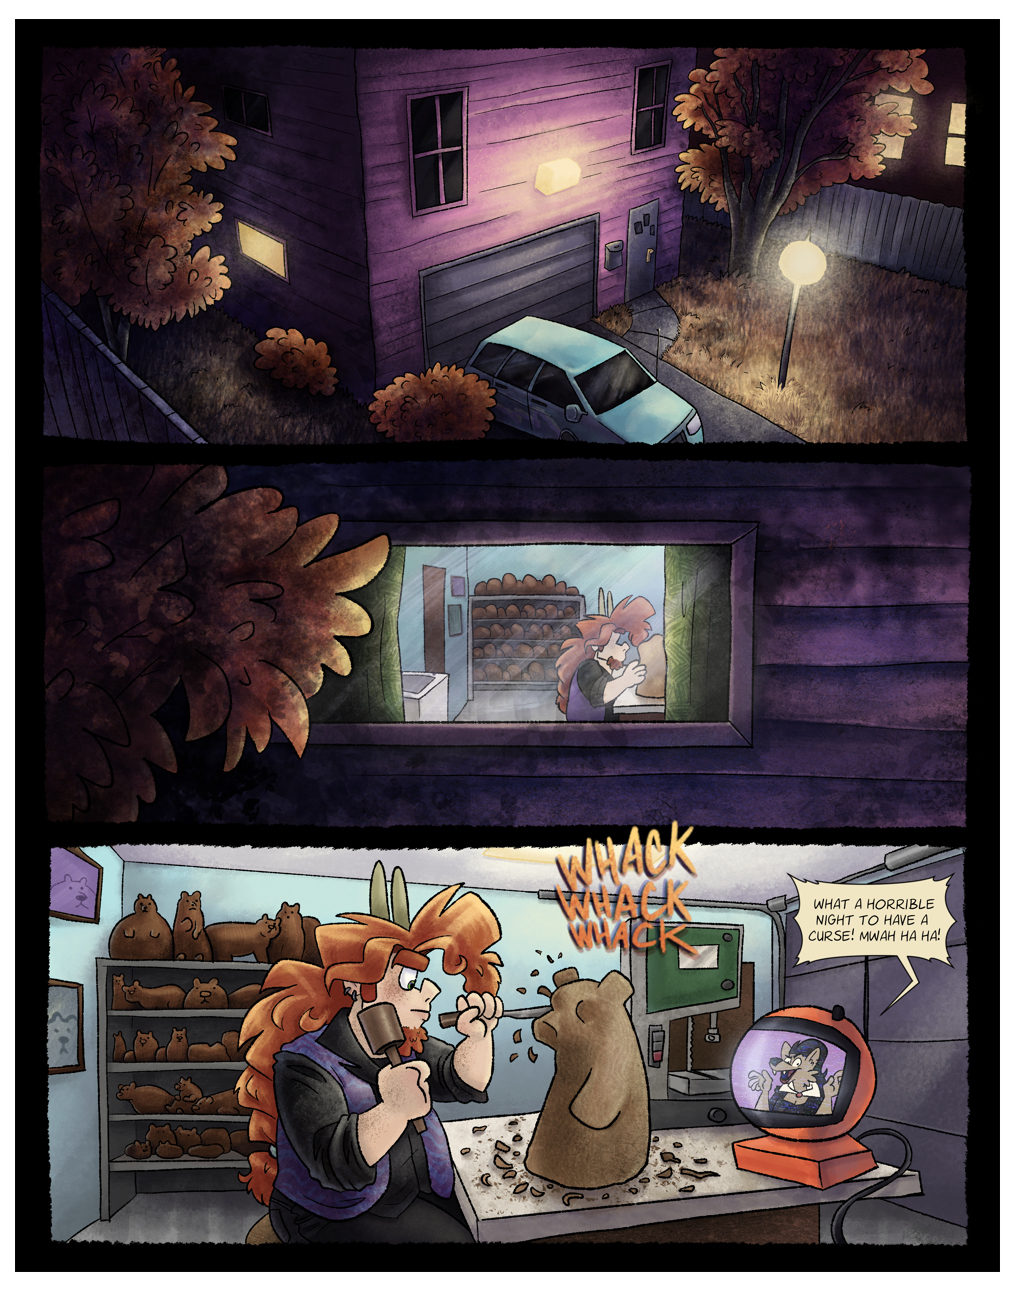 Chapter 3 page 1: Evening Activities